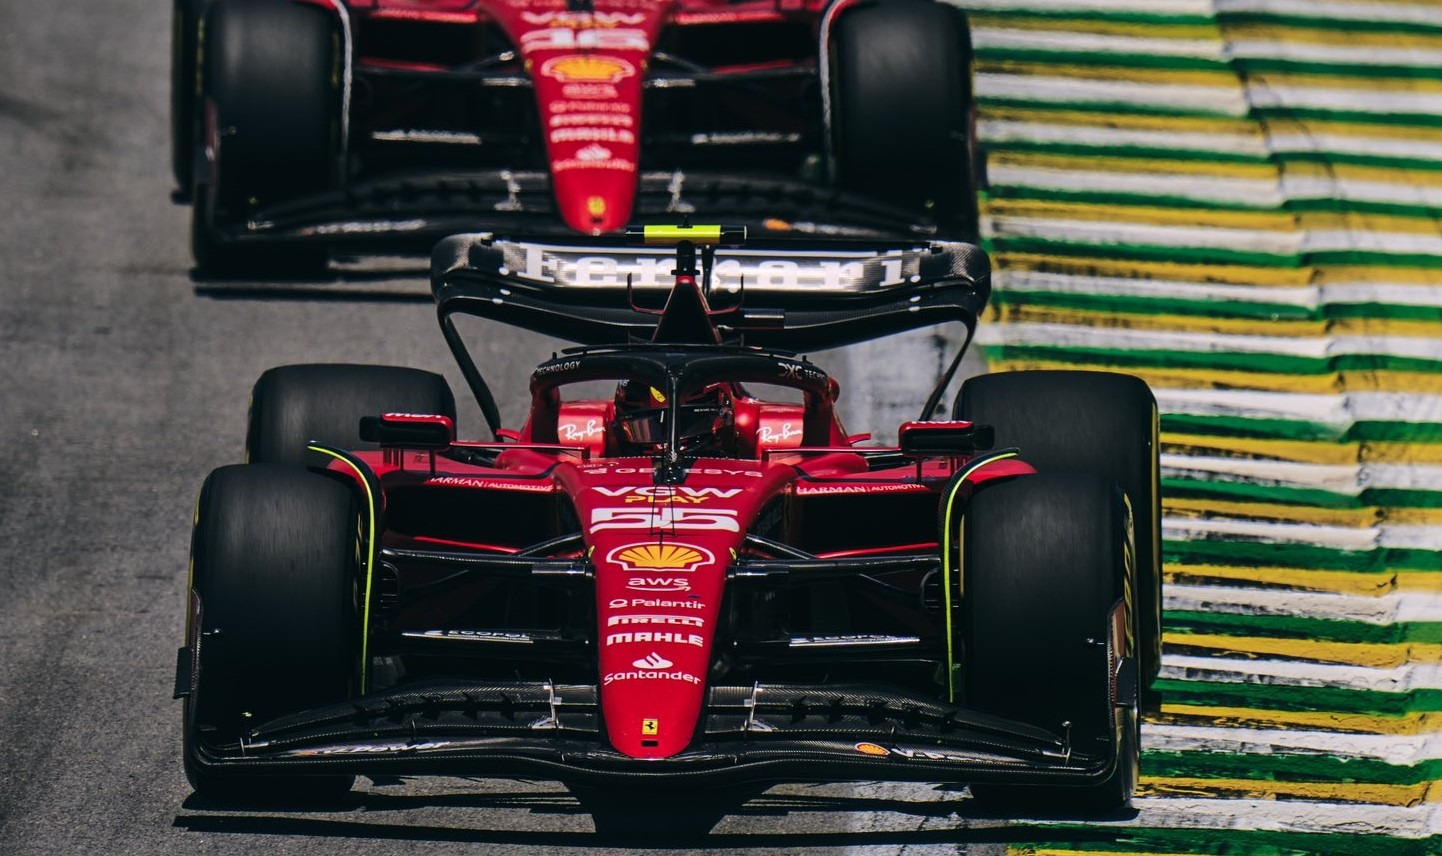 Cooling problem forces Ferrari drivers to 'lift and coast' during Brazilian Sprint